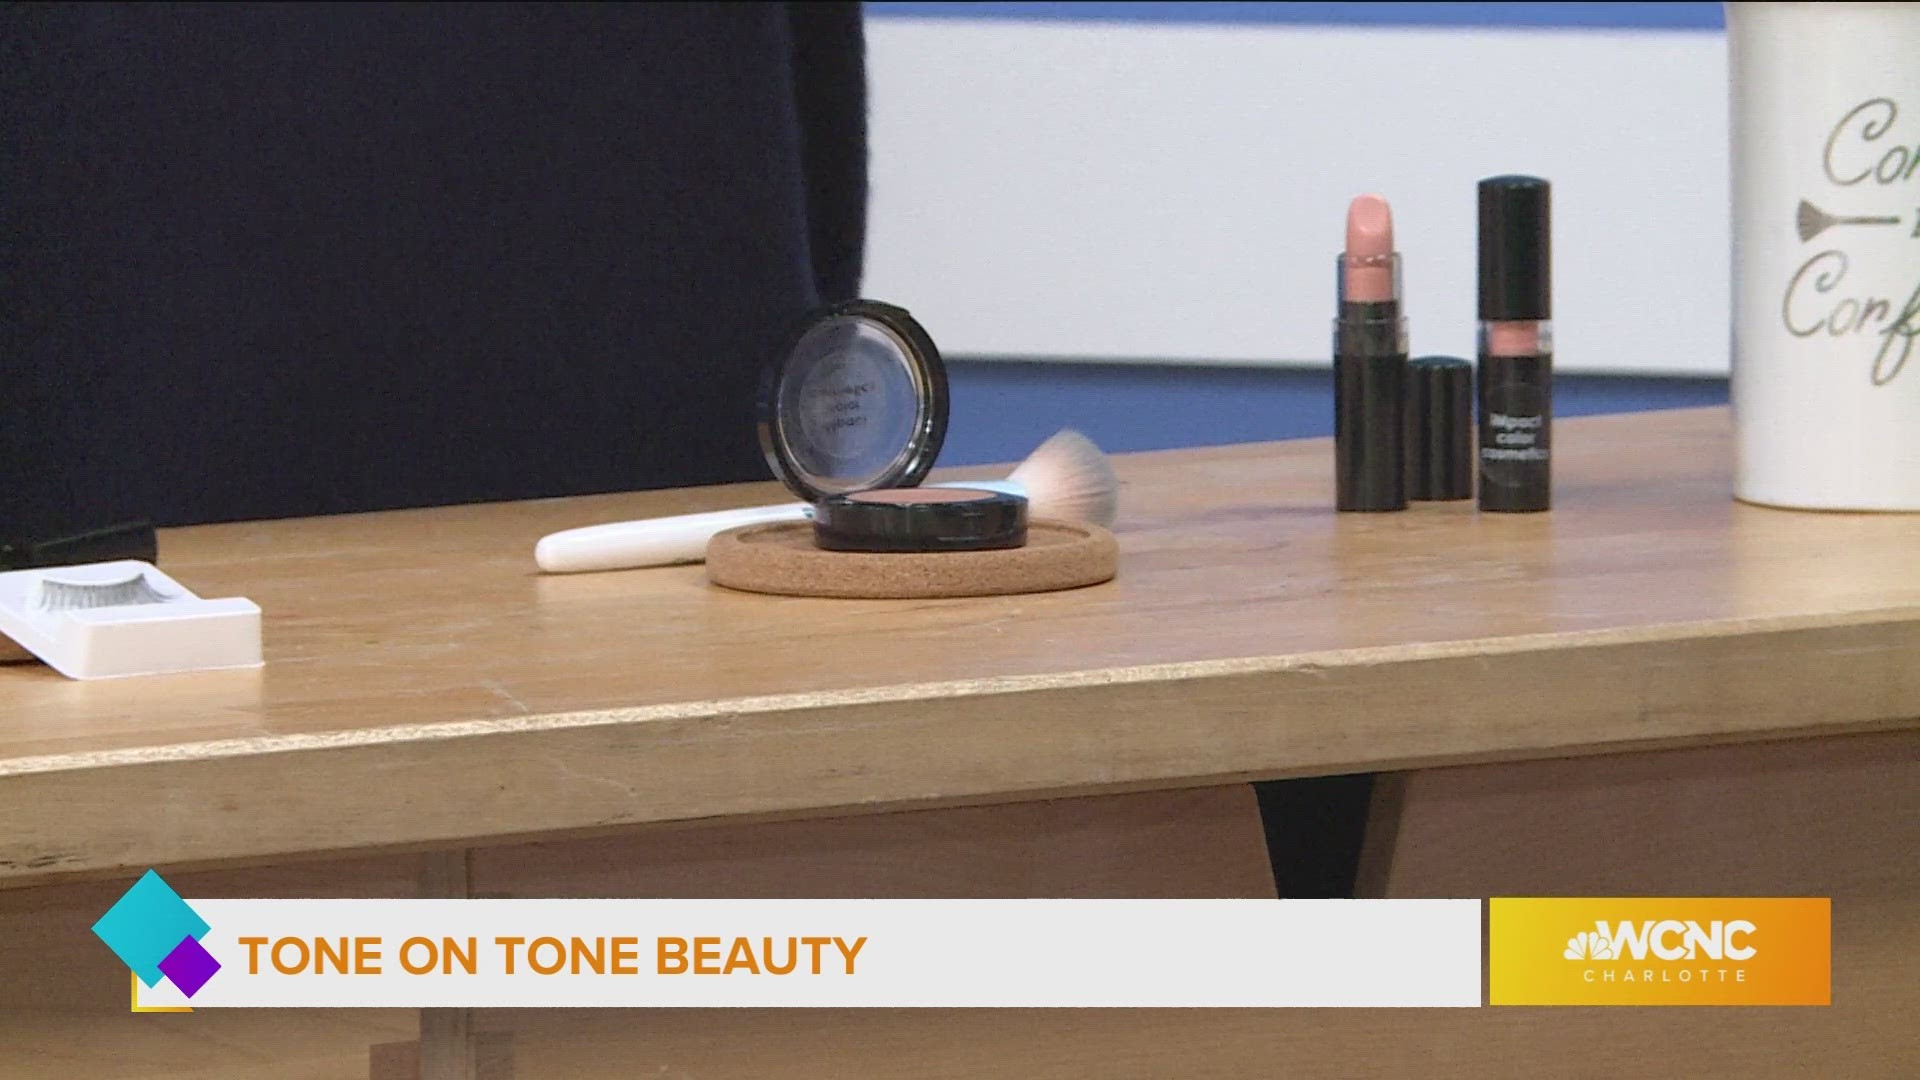 Stanley Owings from iMpact Color Cosmetics shares some great beauty tips for this season